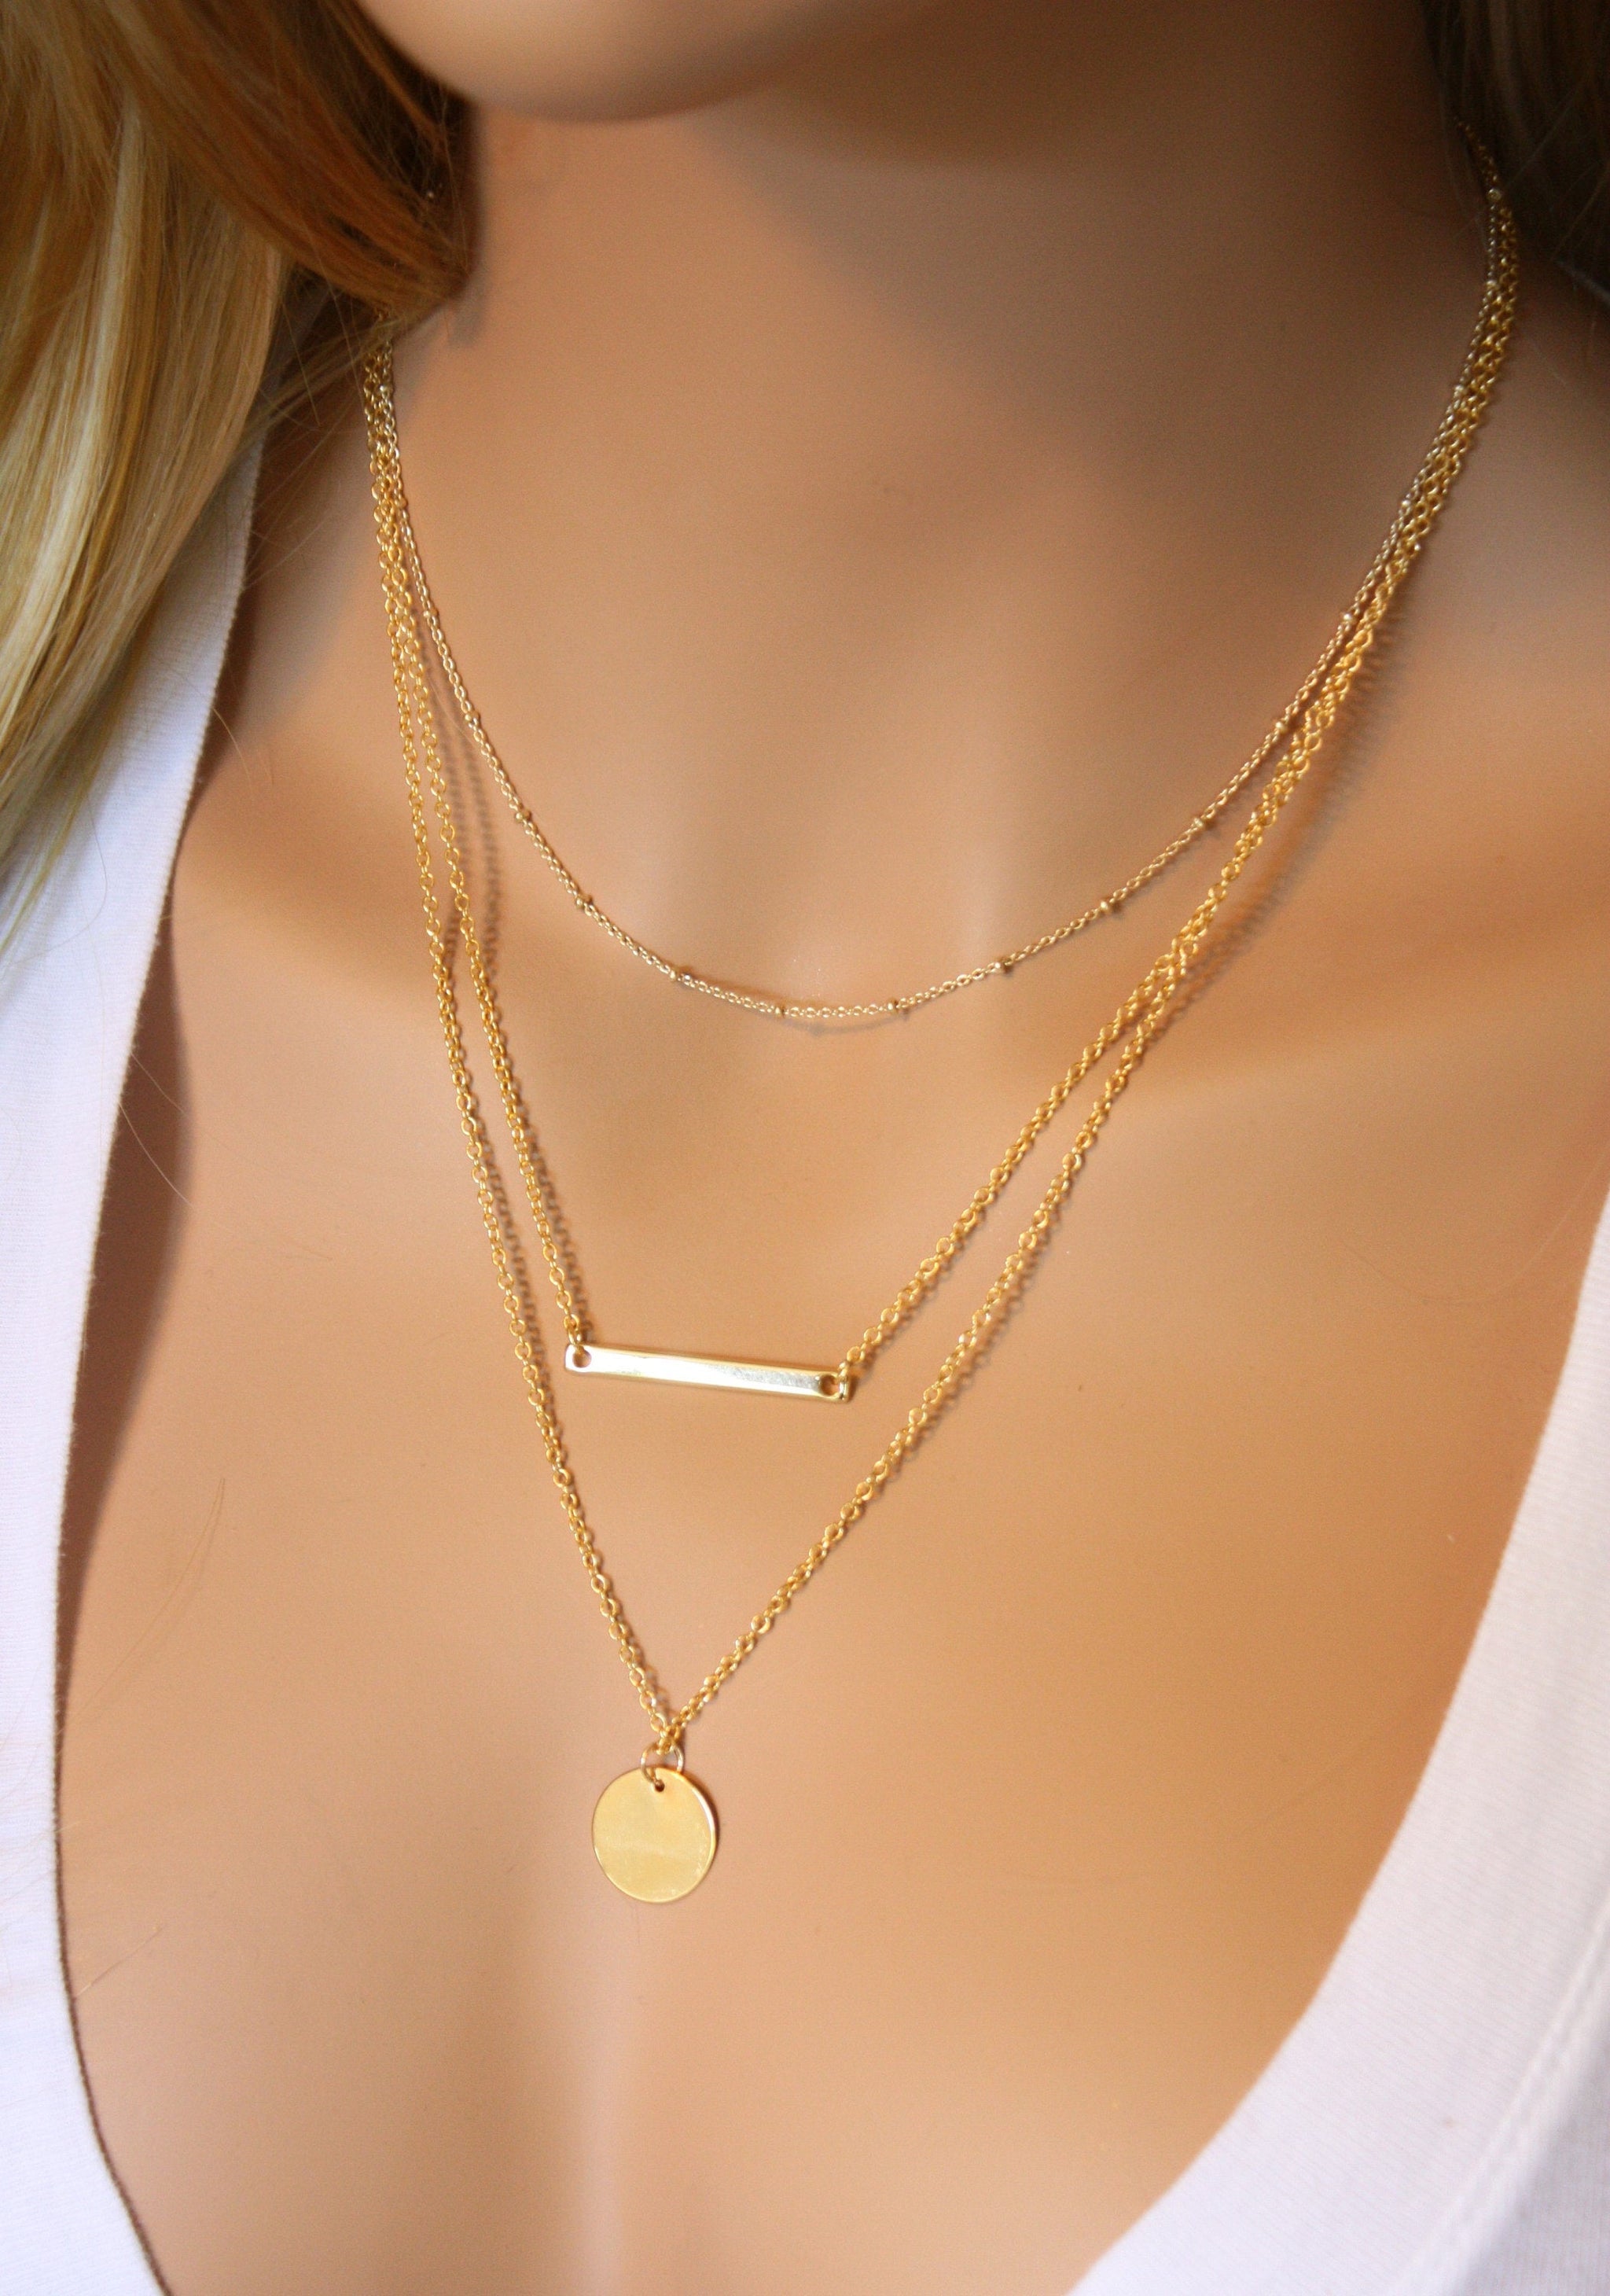 Multilayer Stainless Steel Gold Plated Necklace 4 Tier Pendants Short and  Long Chain Necklace Women Accessories (silver/gold/rose gold) - China  Stainless Steel Jewelry and Necklace price | Made-in-China.com